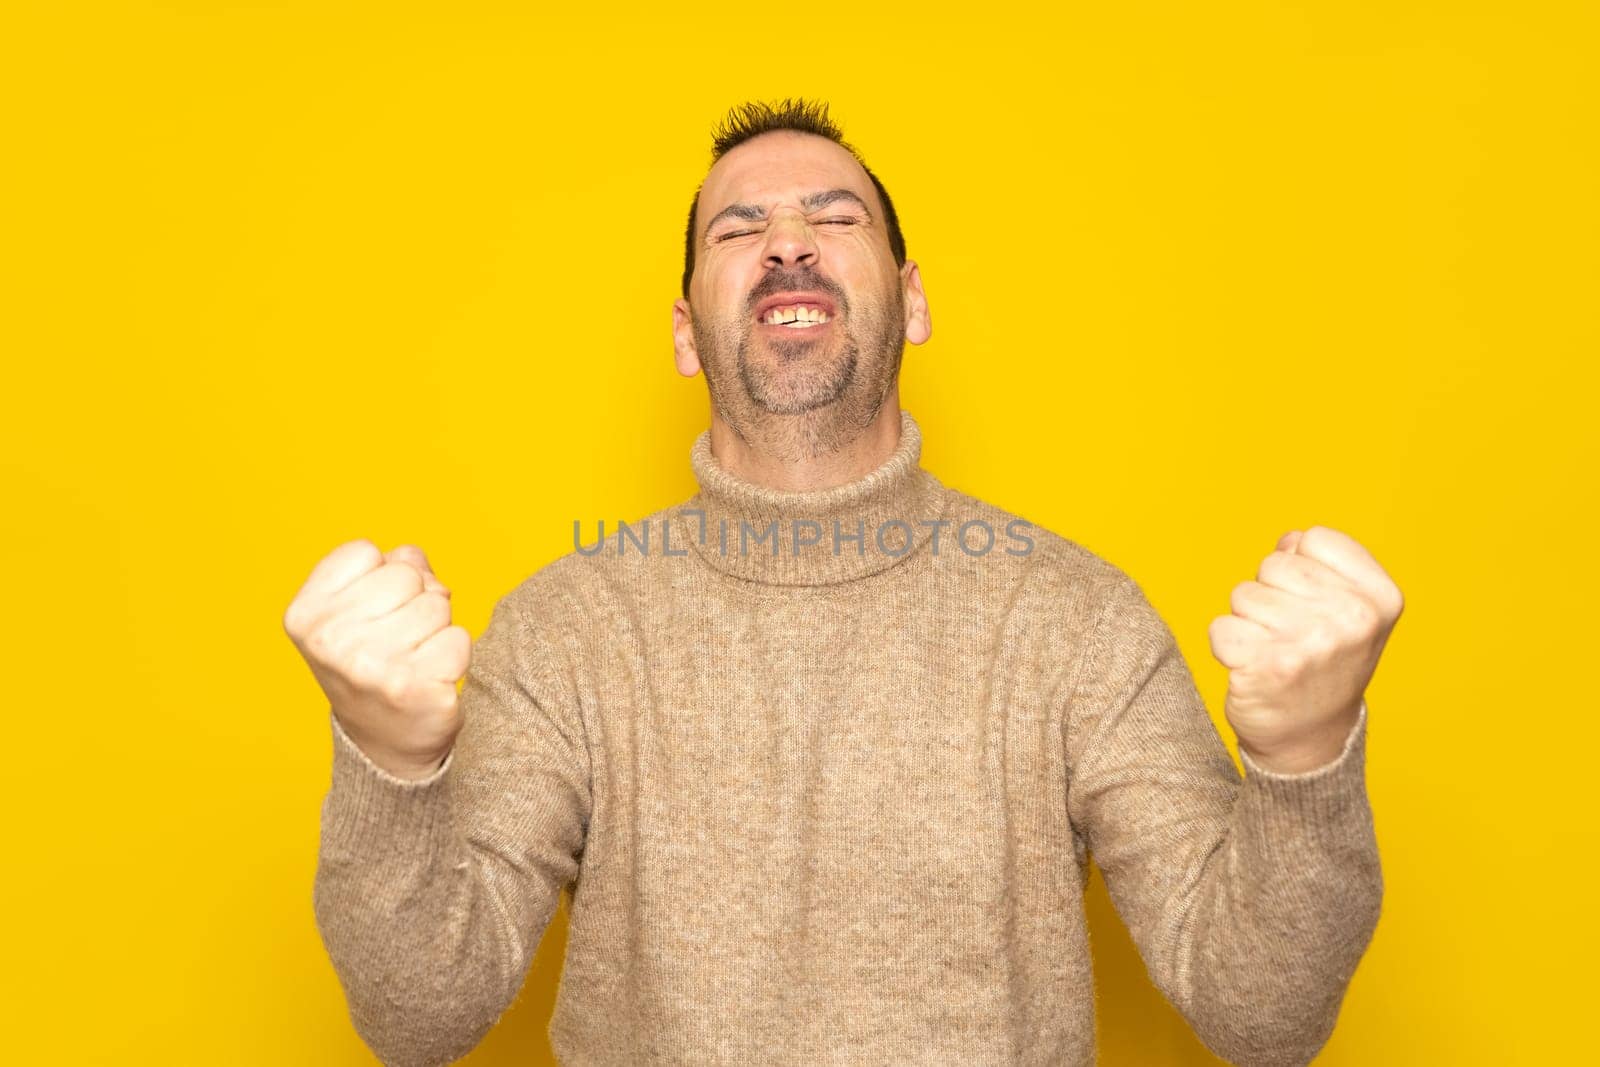 Bearded Hispanic man in his 40s wearing a beige turtleneck energetically celebrating a big win with raised fists, isolated on yellow studio background